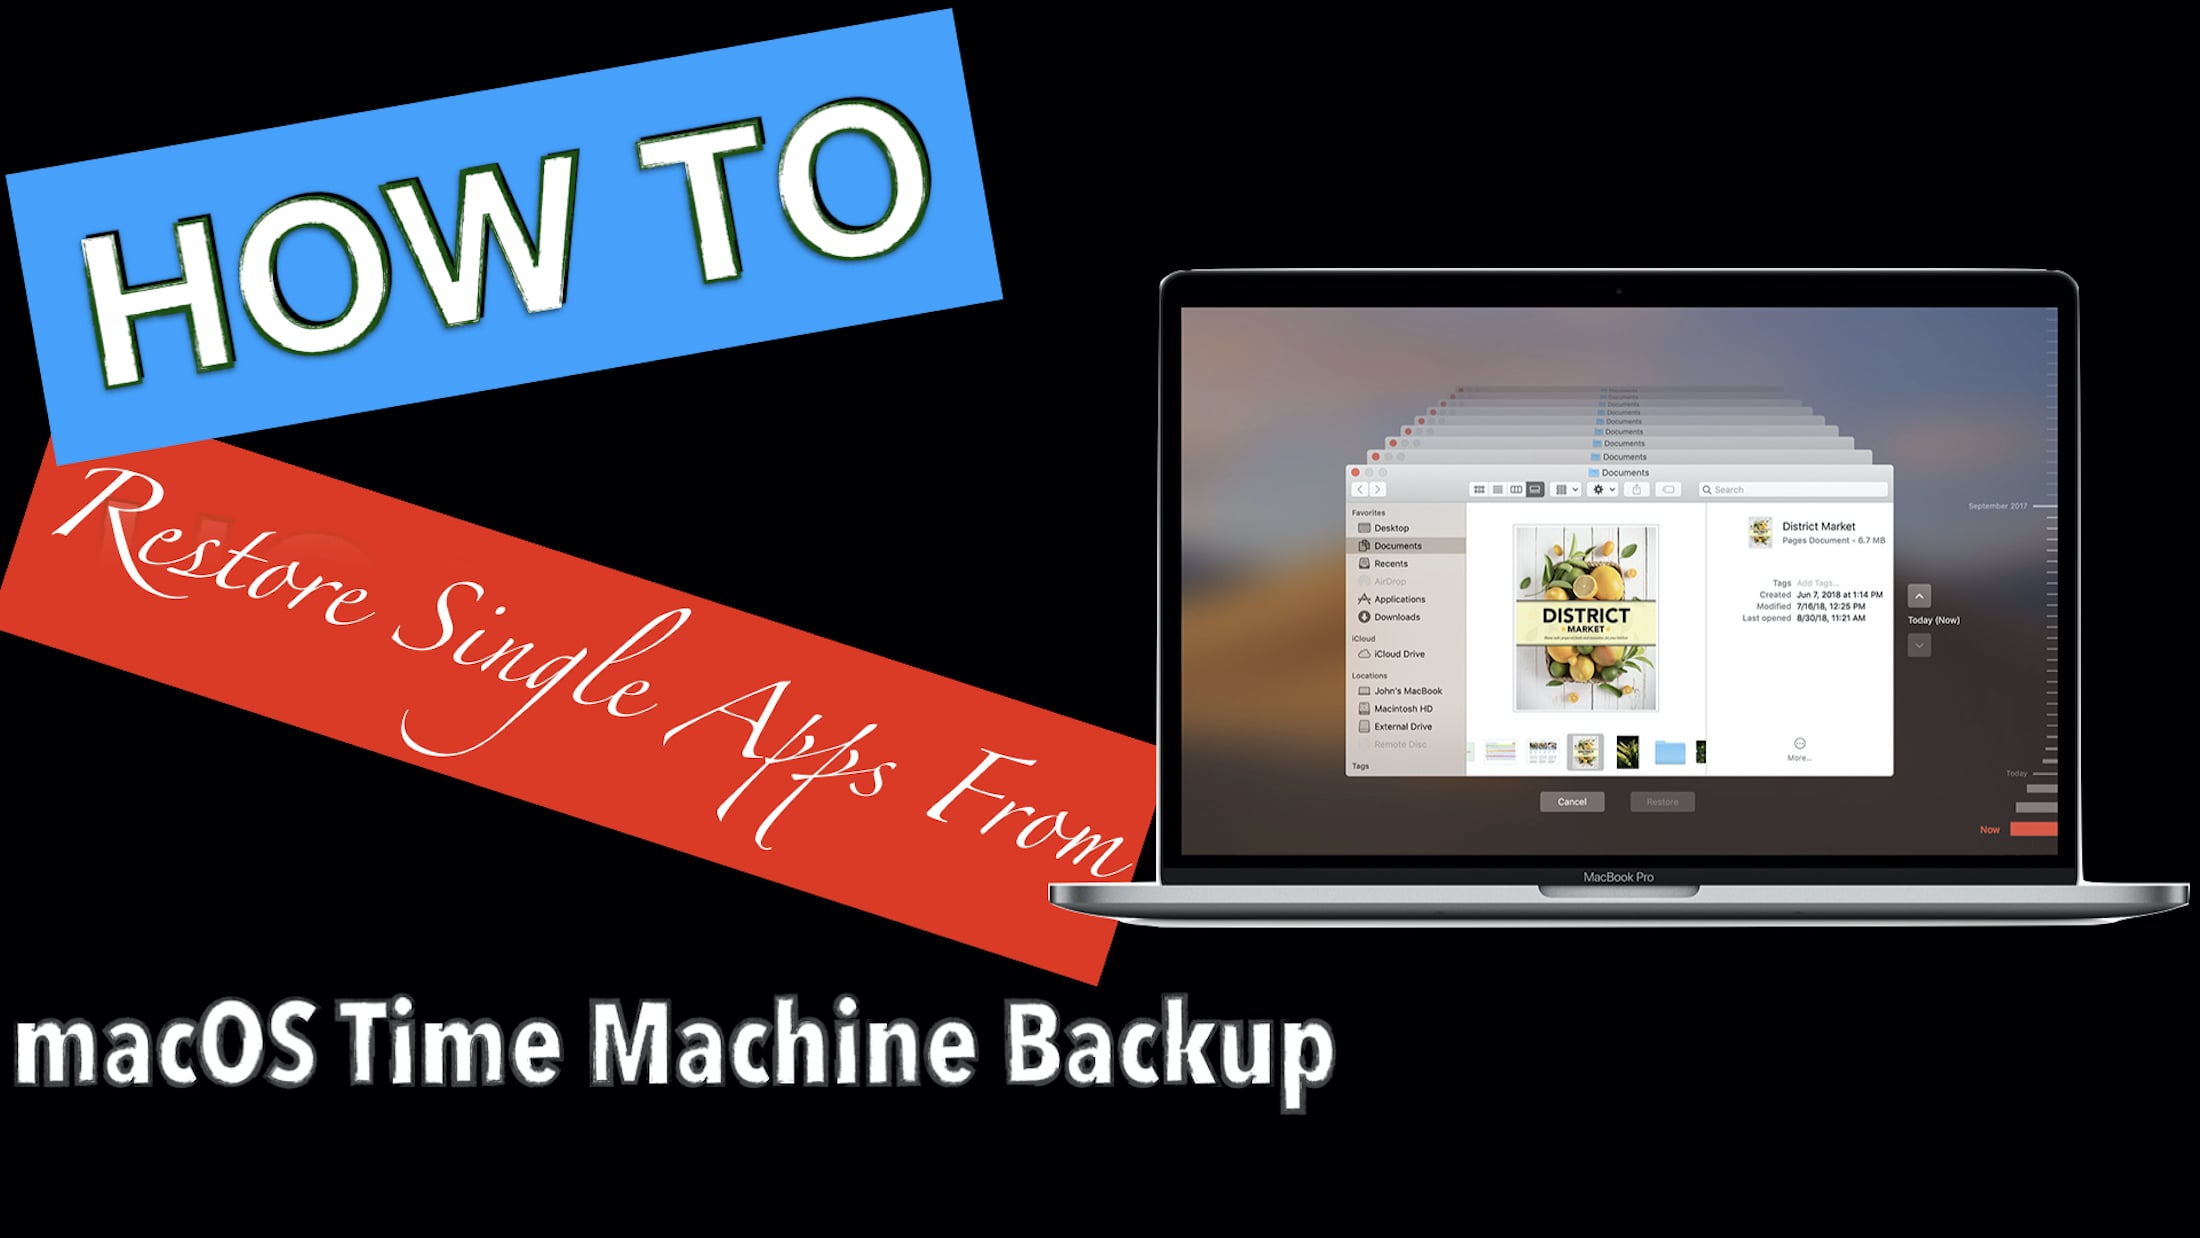 install macos from time machine backup